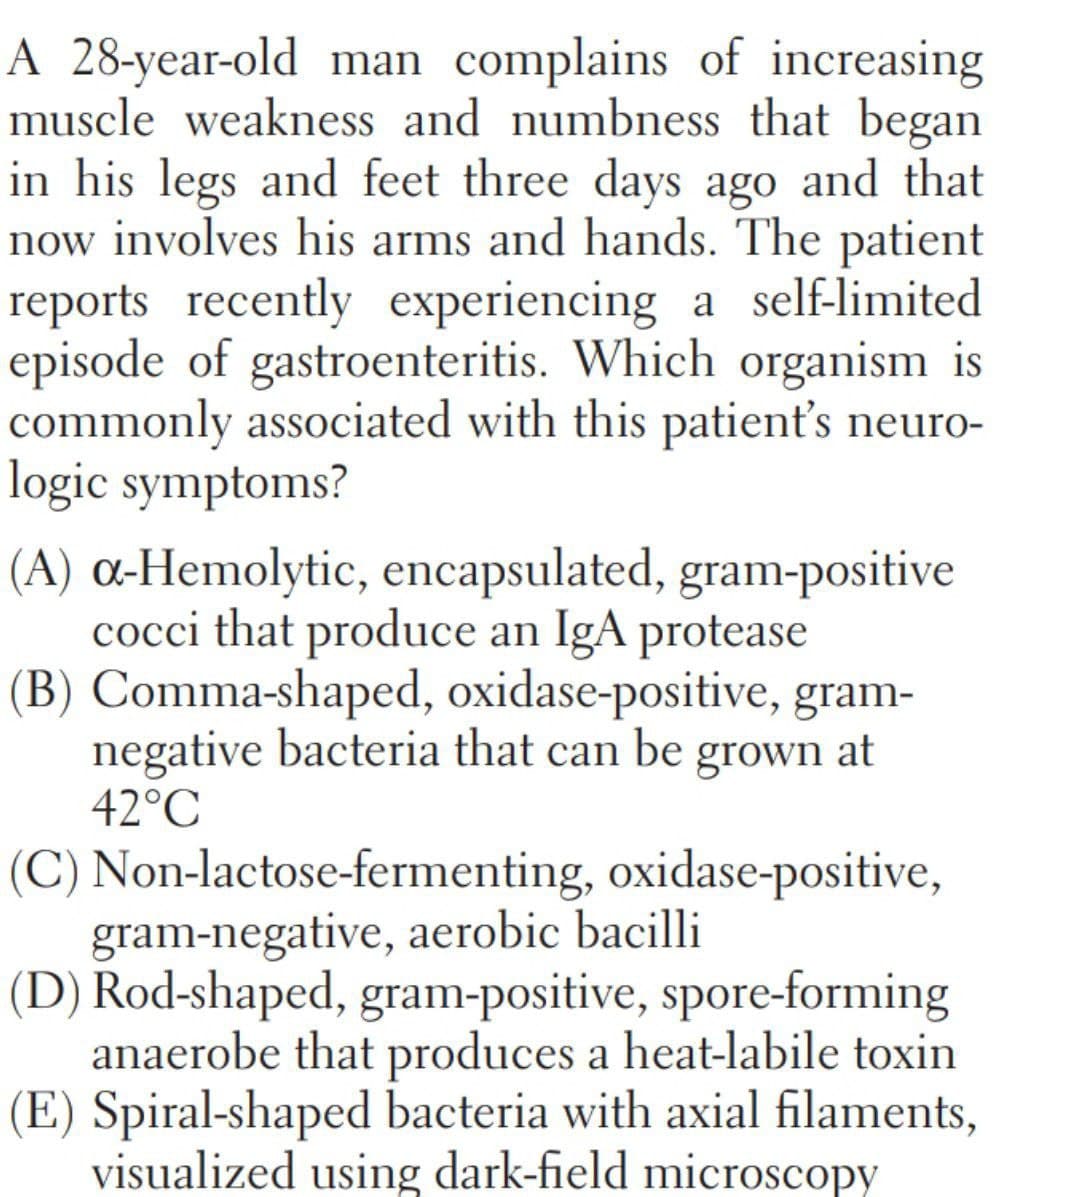 A 28-year-old man complains of increasing
muscle weakness and numbness that began
in his legs and feet three days ago and that
now involves his arms and hands. The patient
reports recently experiencing a self-limited
episode of gastroenteritis. Which organism is
commonly associated with this patient's neuro-
logic symptoms?
(A) a-Hemolytic, encapsulated, gram-positive
cocci that produce an IgA protease
(B) Comma-shaped, oxidase-positive, gram-
negative bacteria that can
42°C
be
grown at
(C) Non-lactose-fermenting, oxidase-positive,
gram-negative, aerobic bacilli
(D) Rod-shaped, gram-positive, spore-forming
anaerobe that produces a heat-labile toxin
(E) Spiral-shaped bacteria with axial filaments,
visualized using dark-field microscopy
